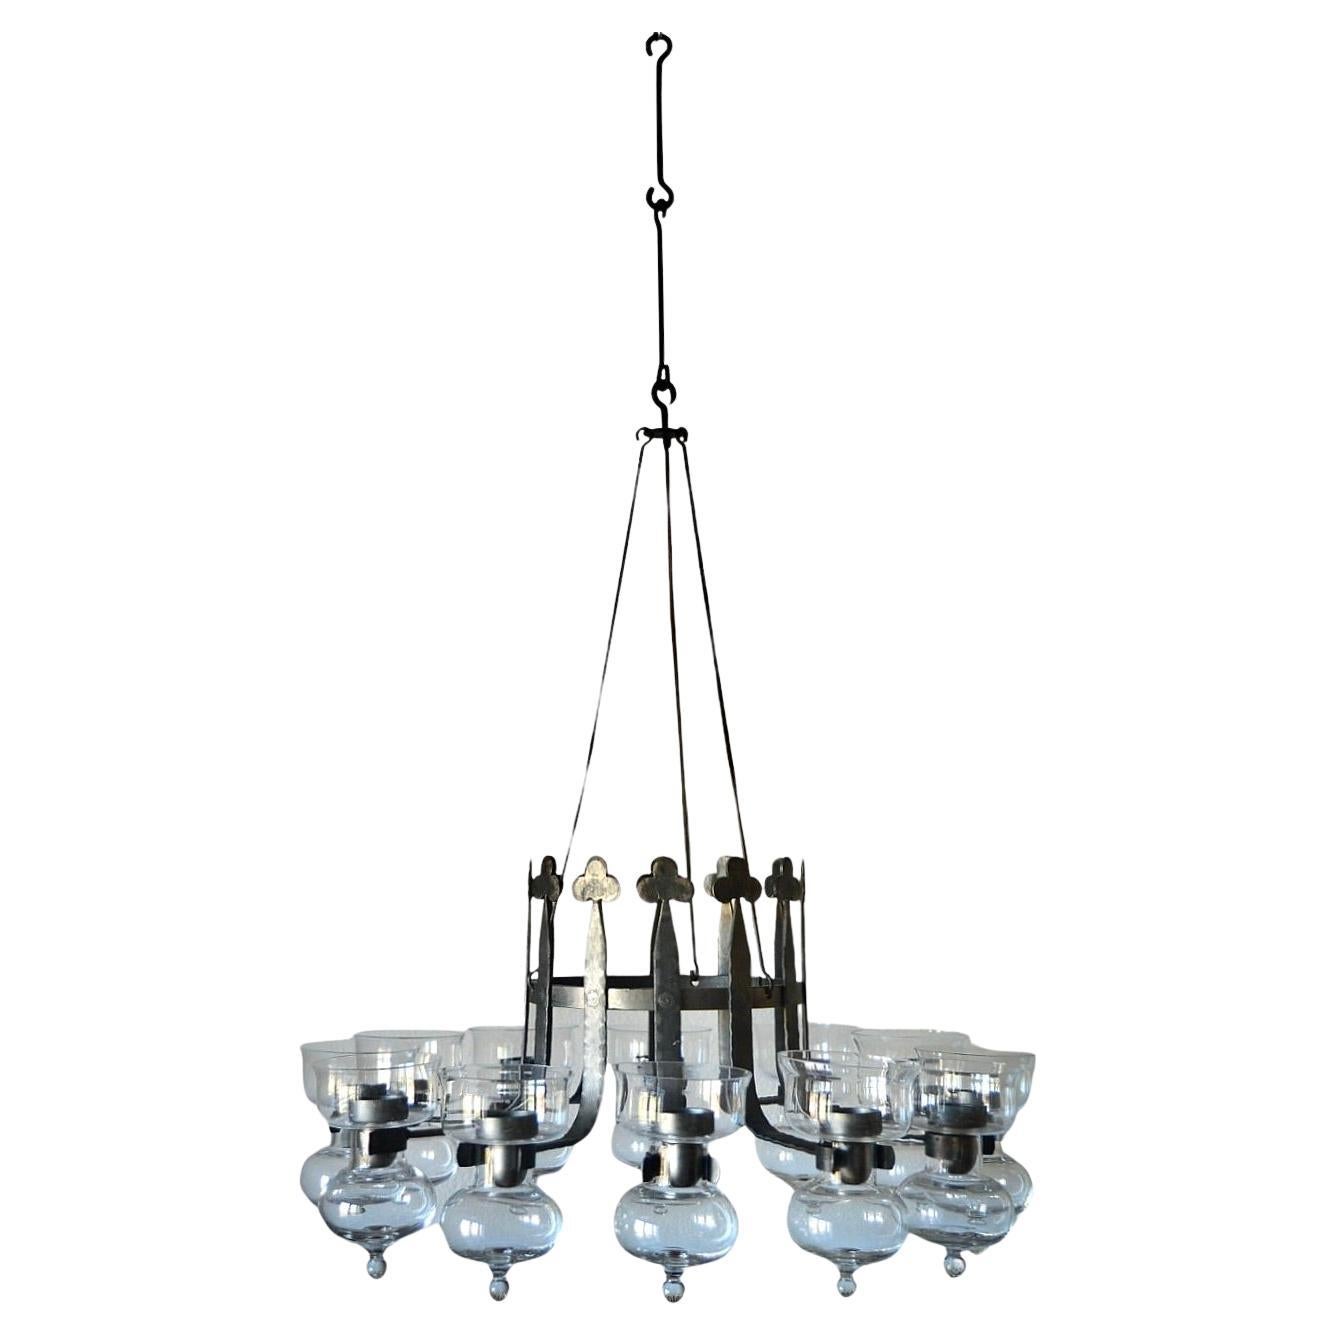 Wrought iron and blown glass chandelier, Bolin Smide, Sweden, 1970's For Sale